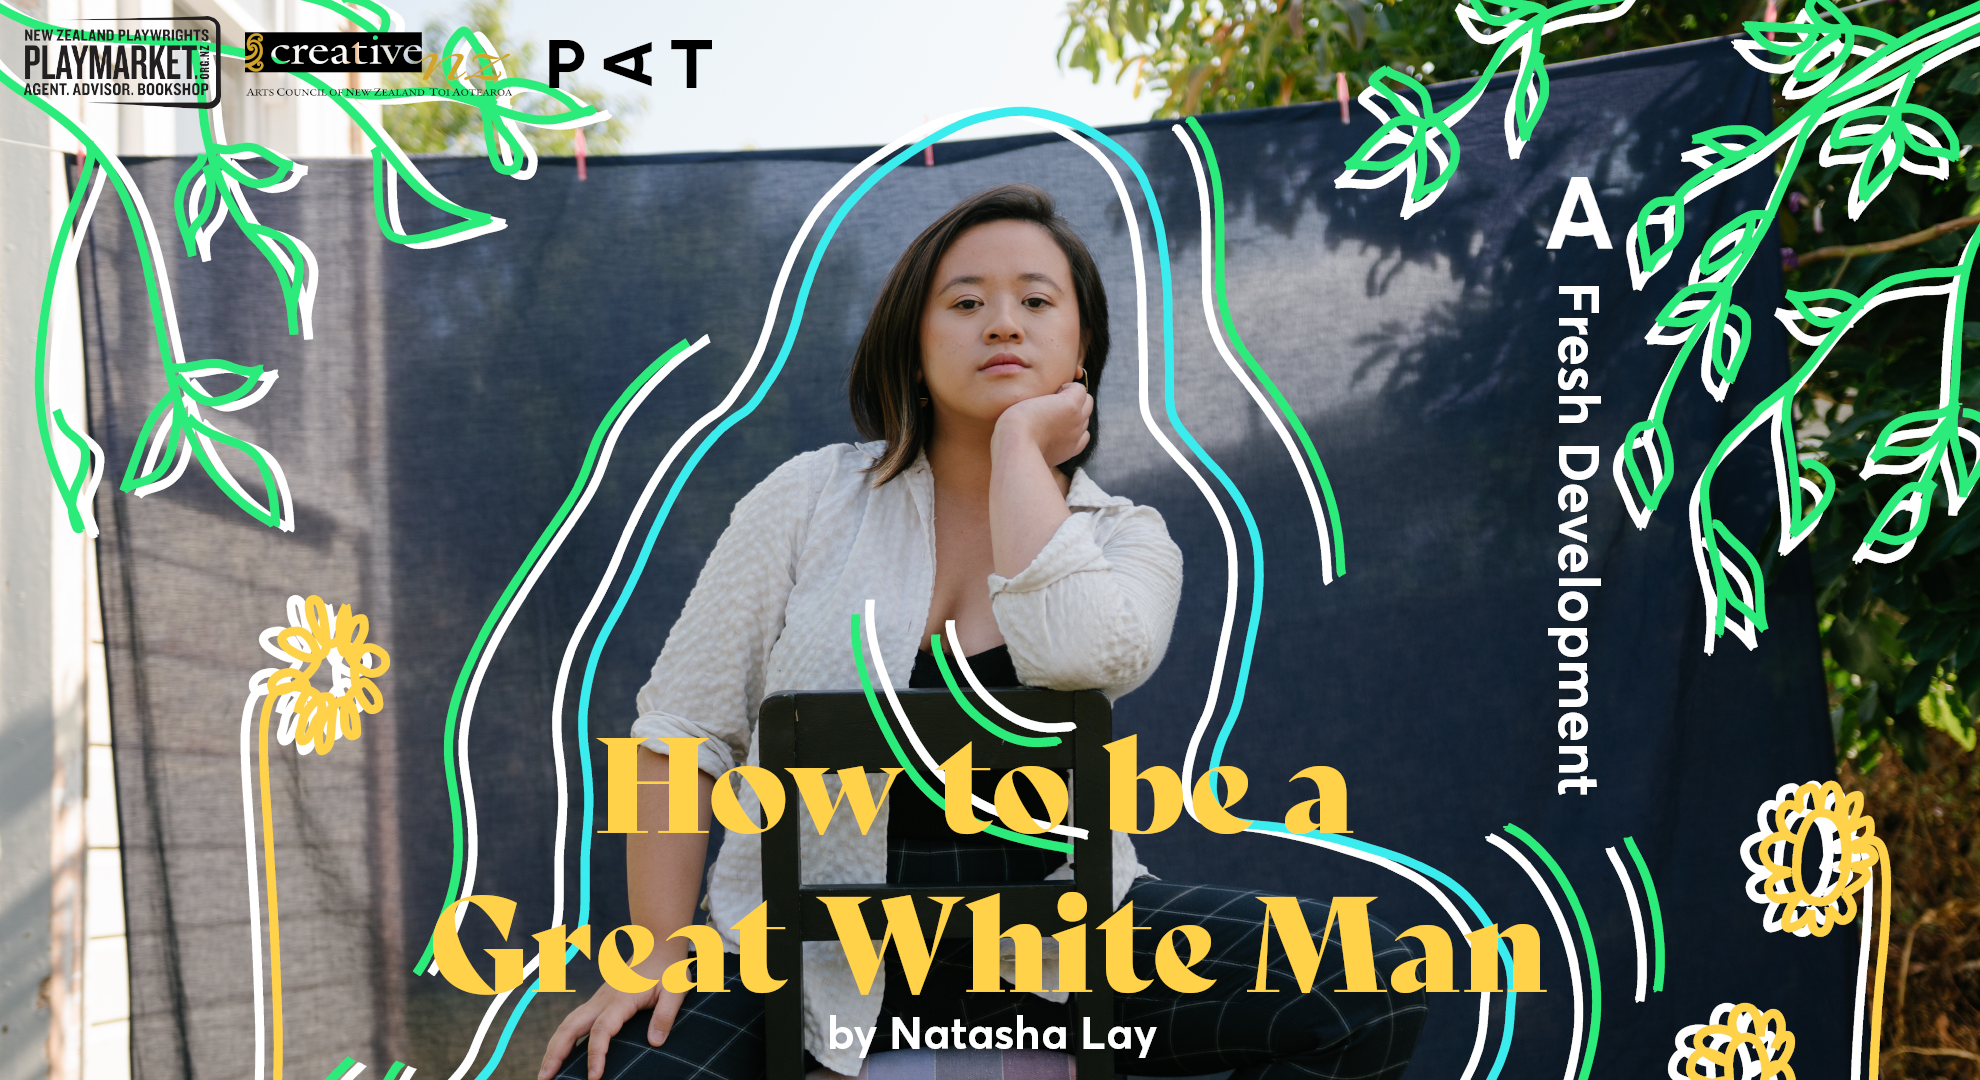 How to be a Great White Man